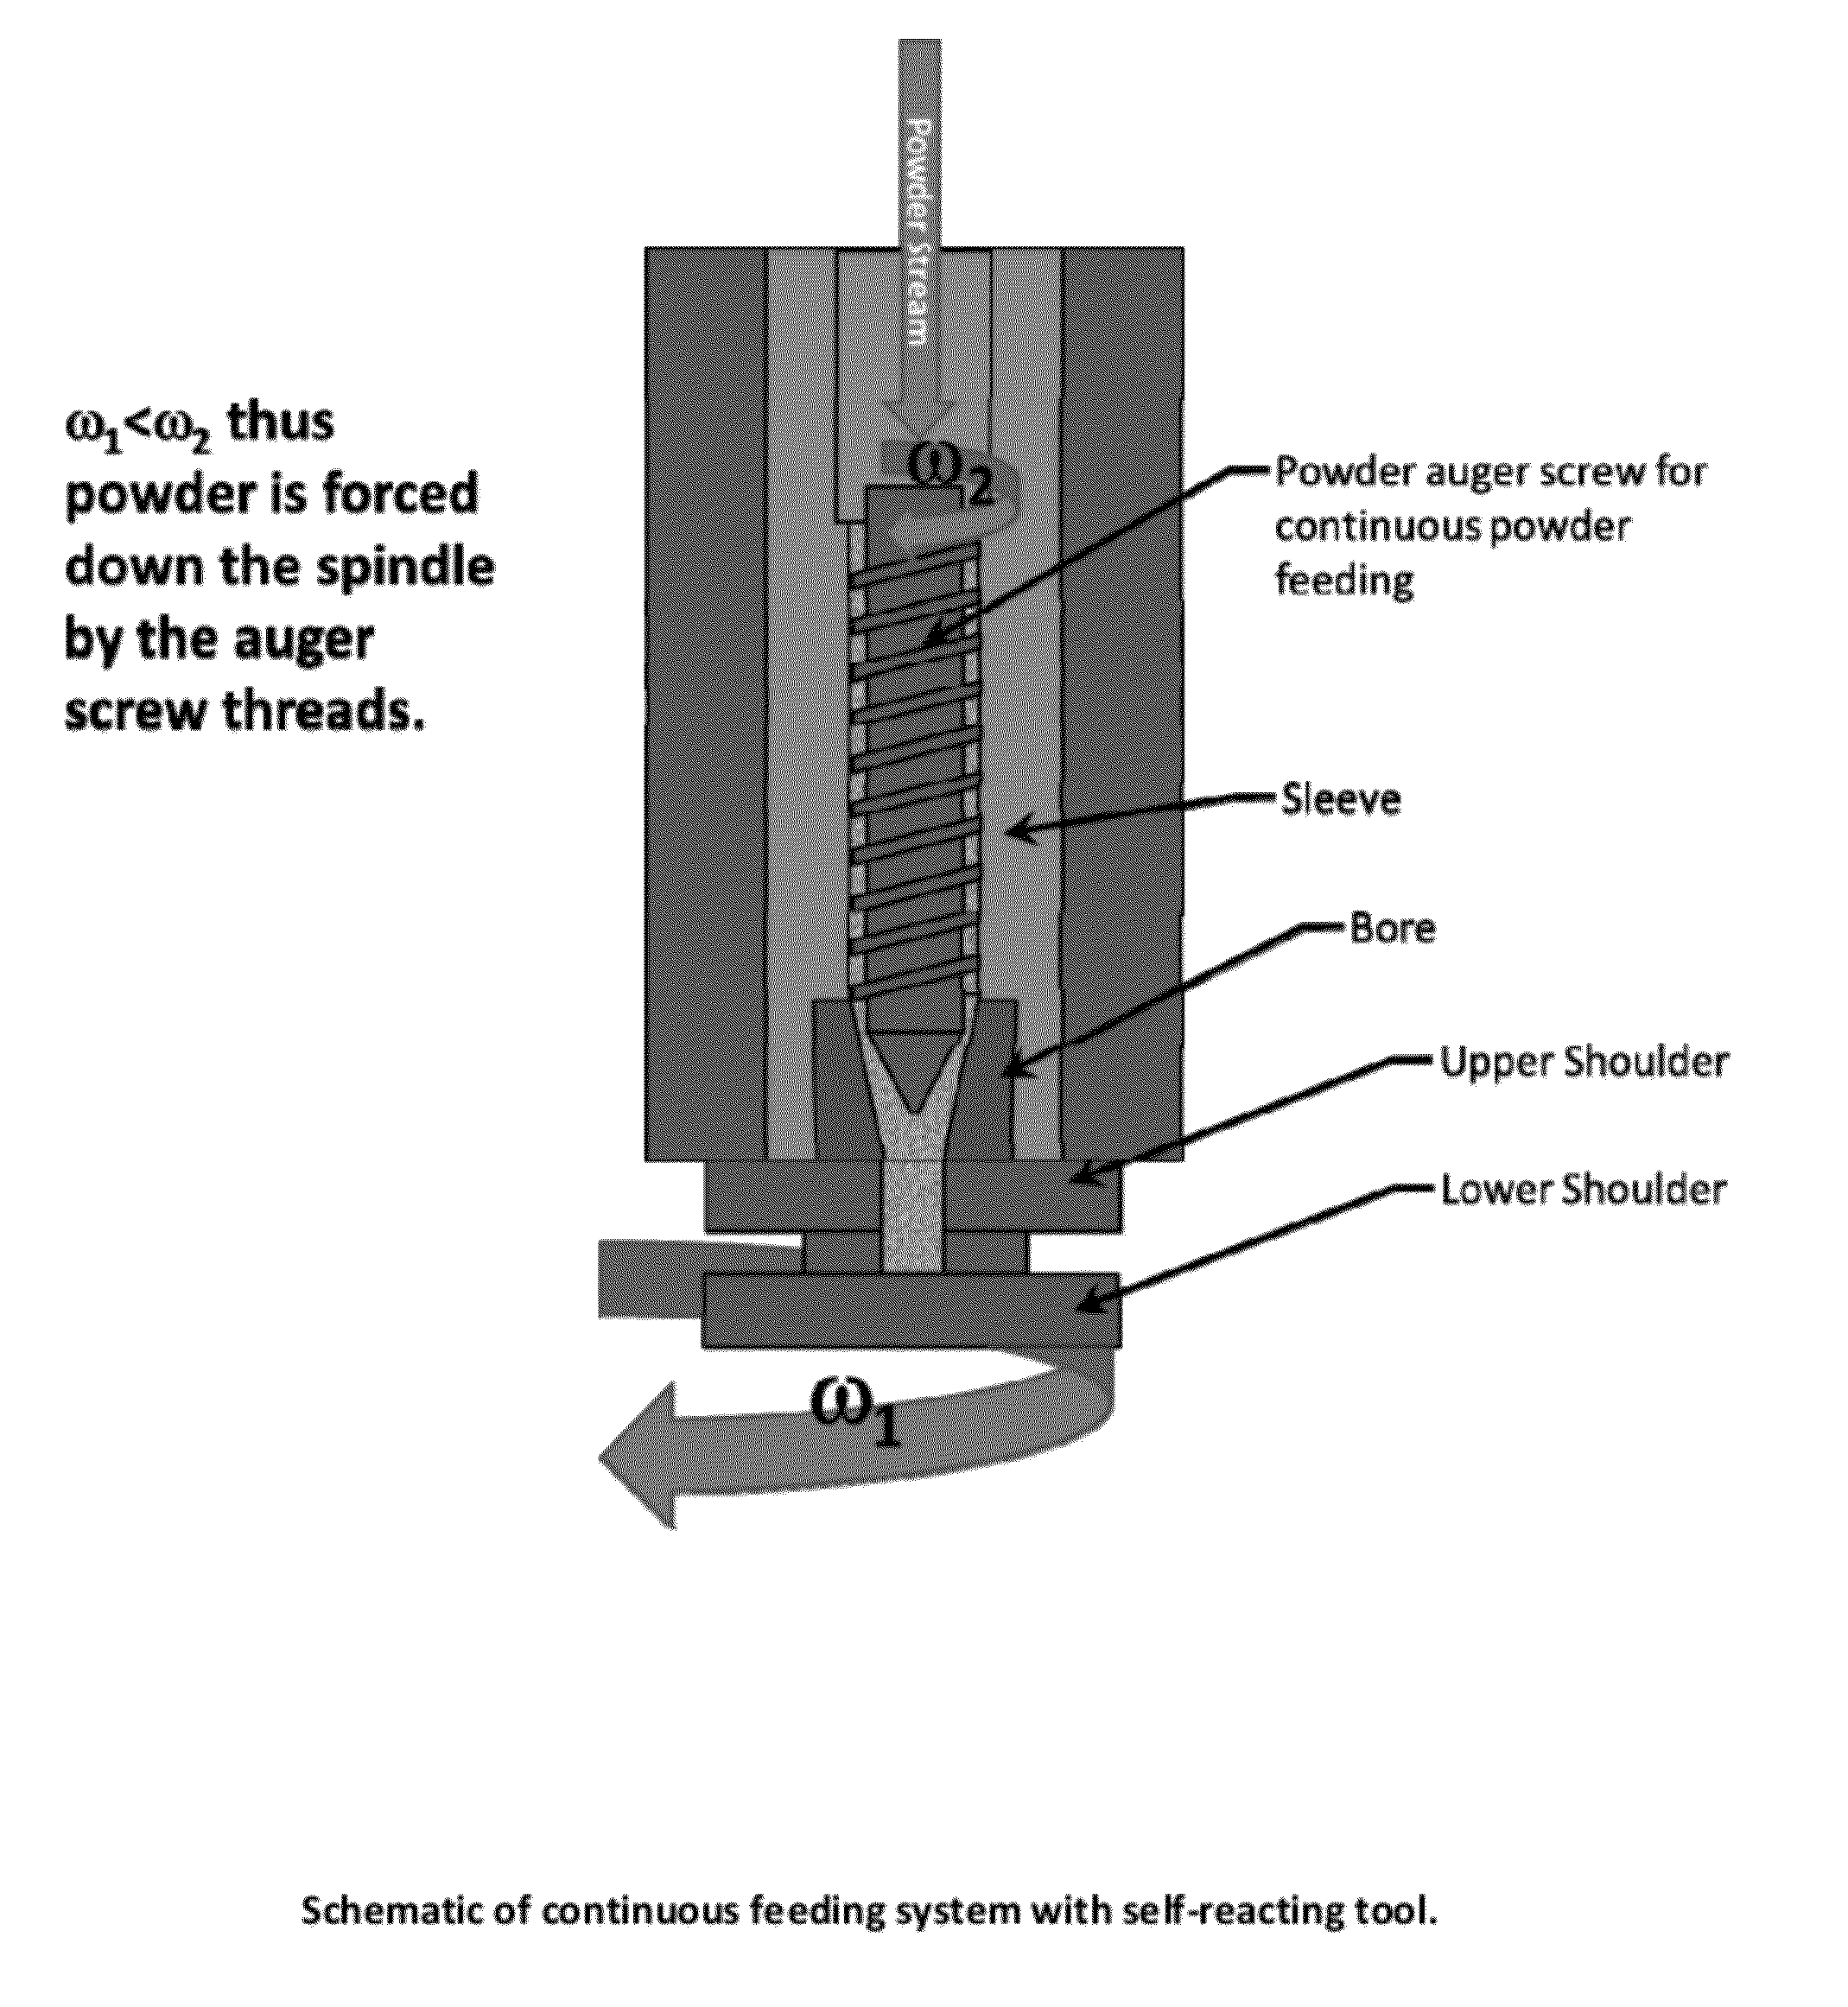 Self-reacting friction stir welding tool with the ability to add filler material